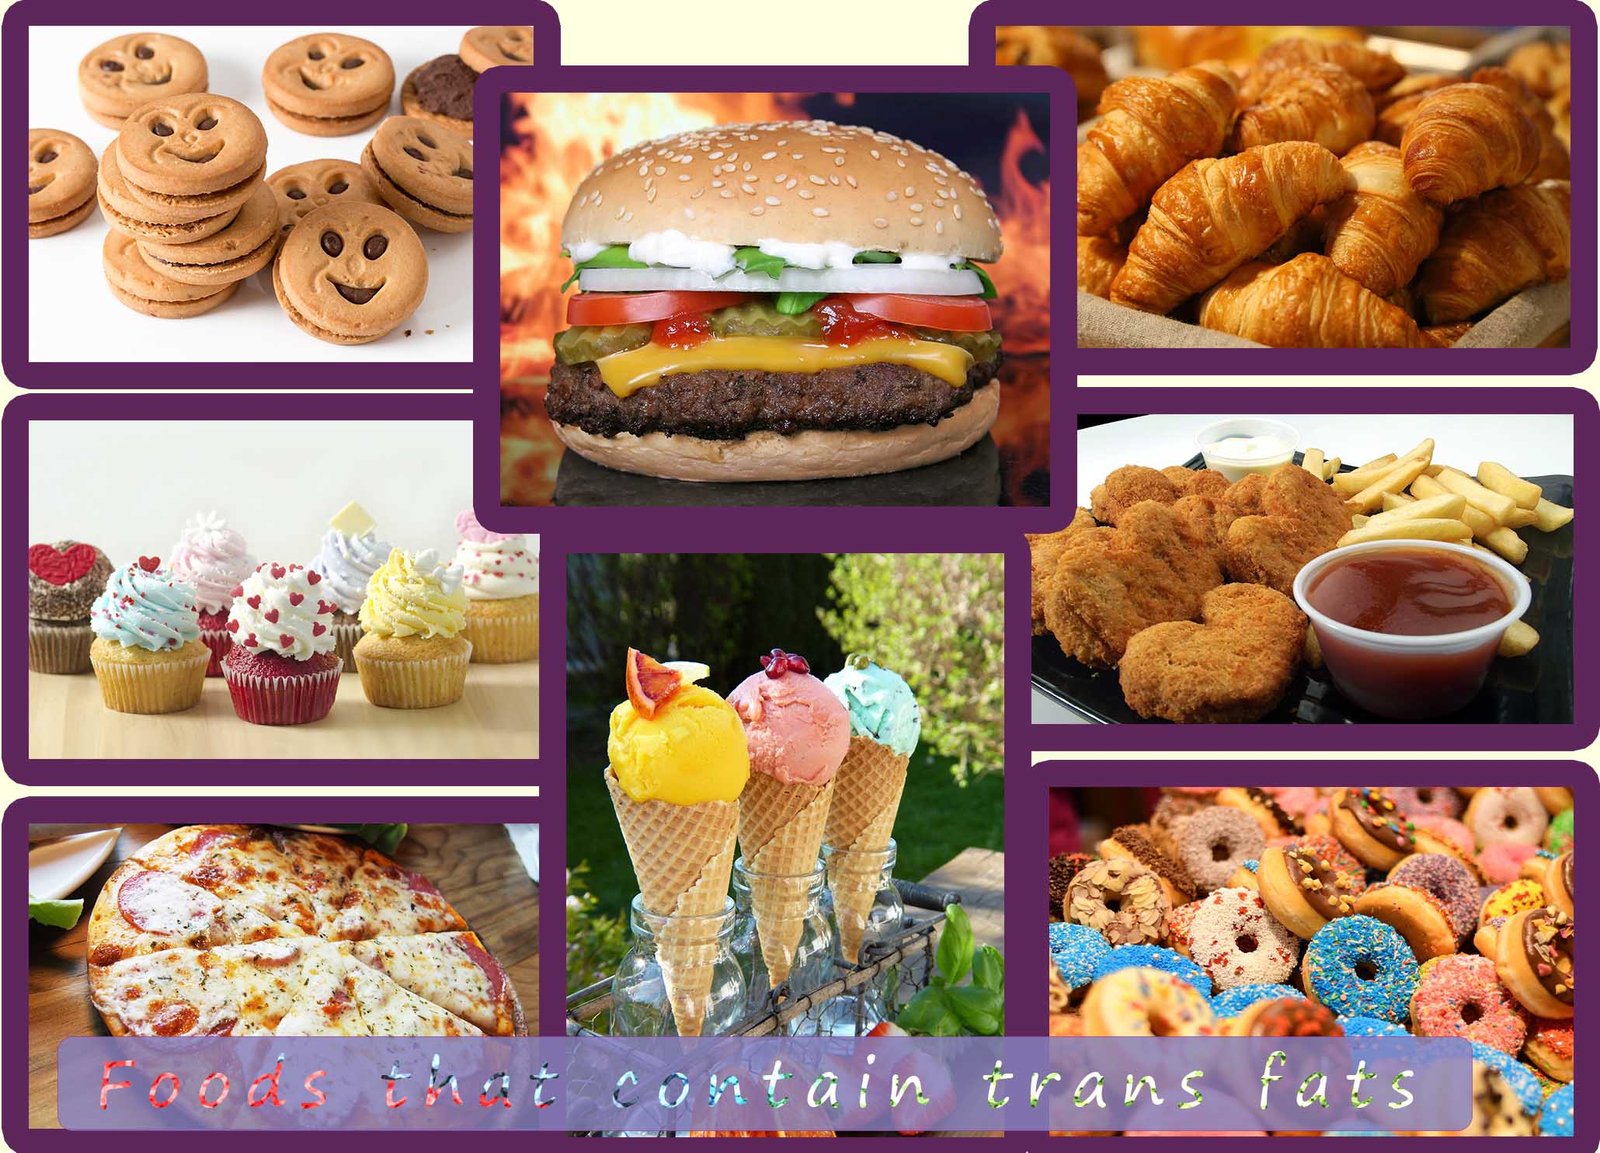 Montage showing foods rich in trans fats.